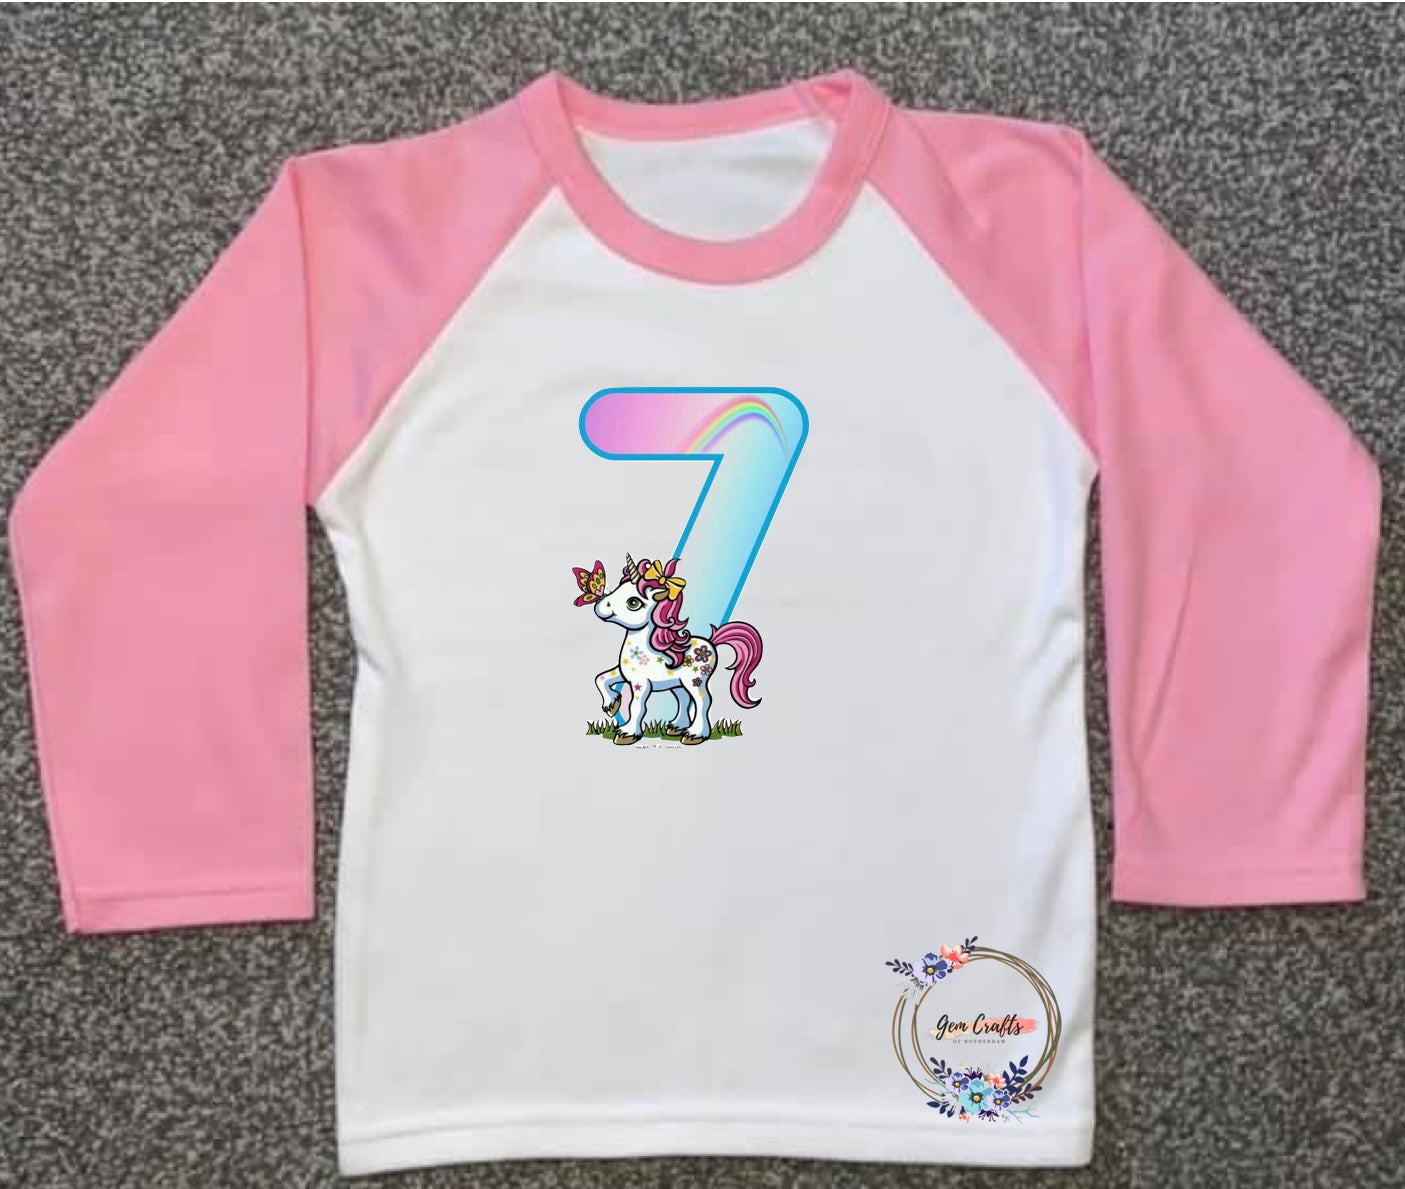 Kids Personalised Unicorn PJs - Plain Pink - Birthday, Ages 6 Months - 10 Years